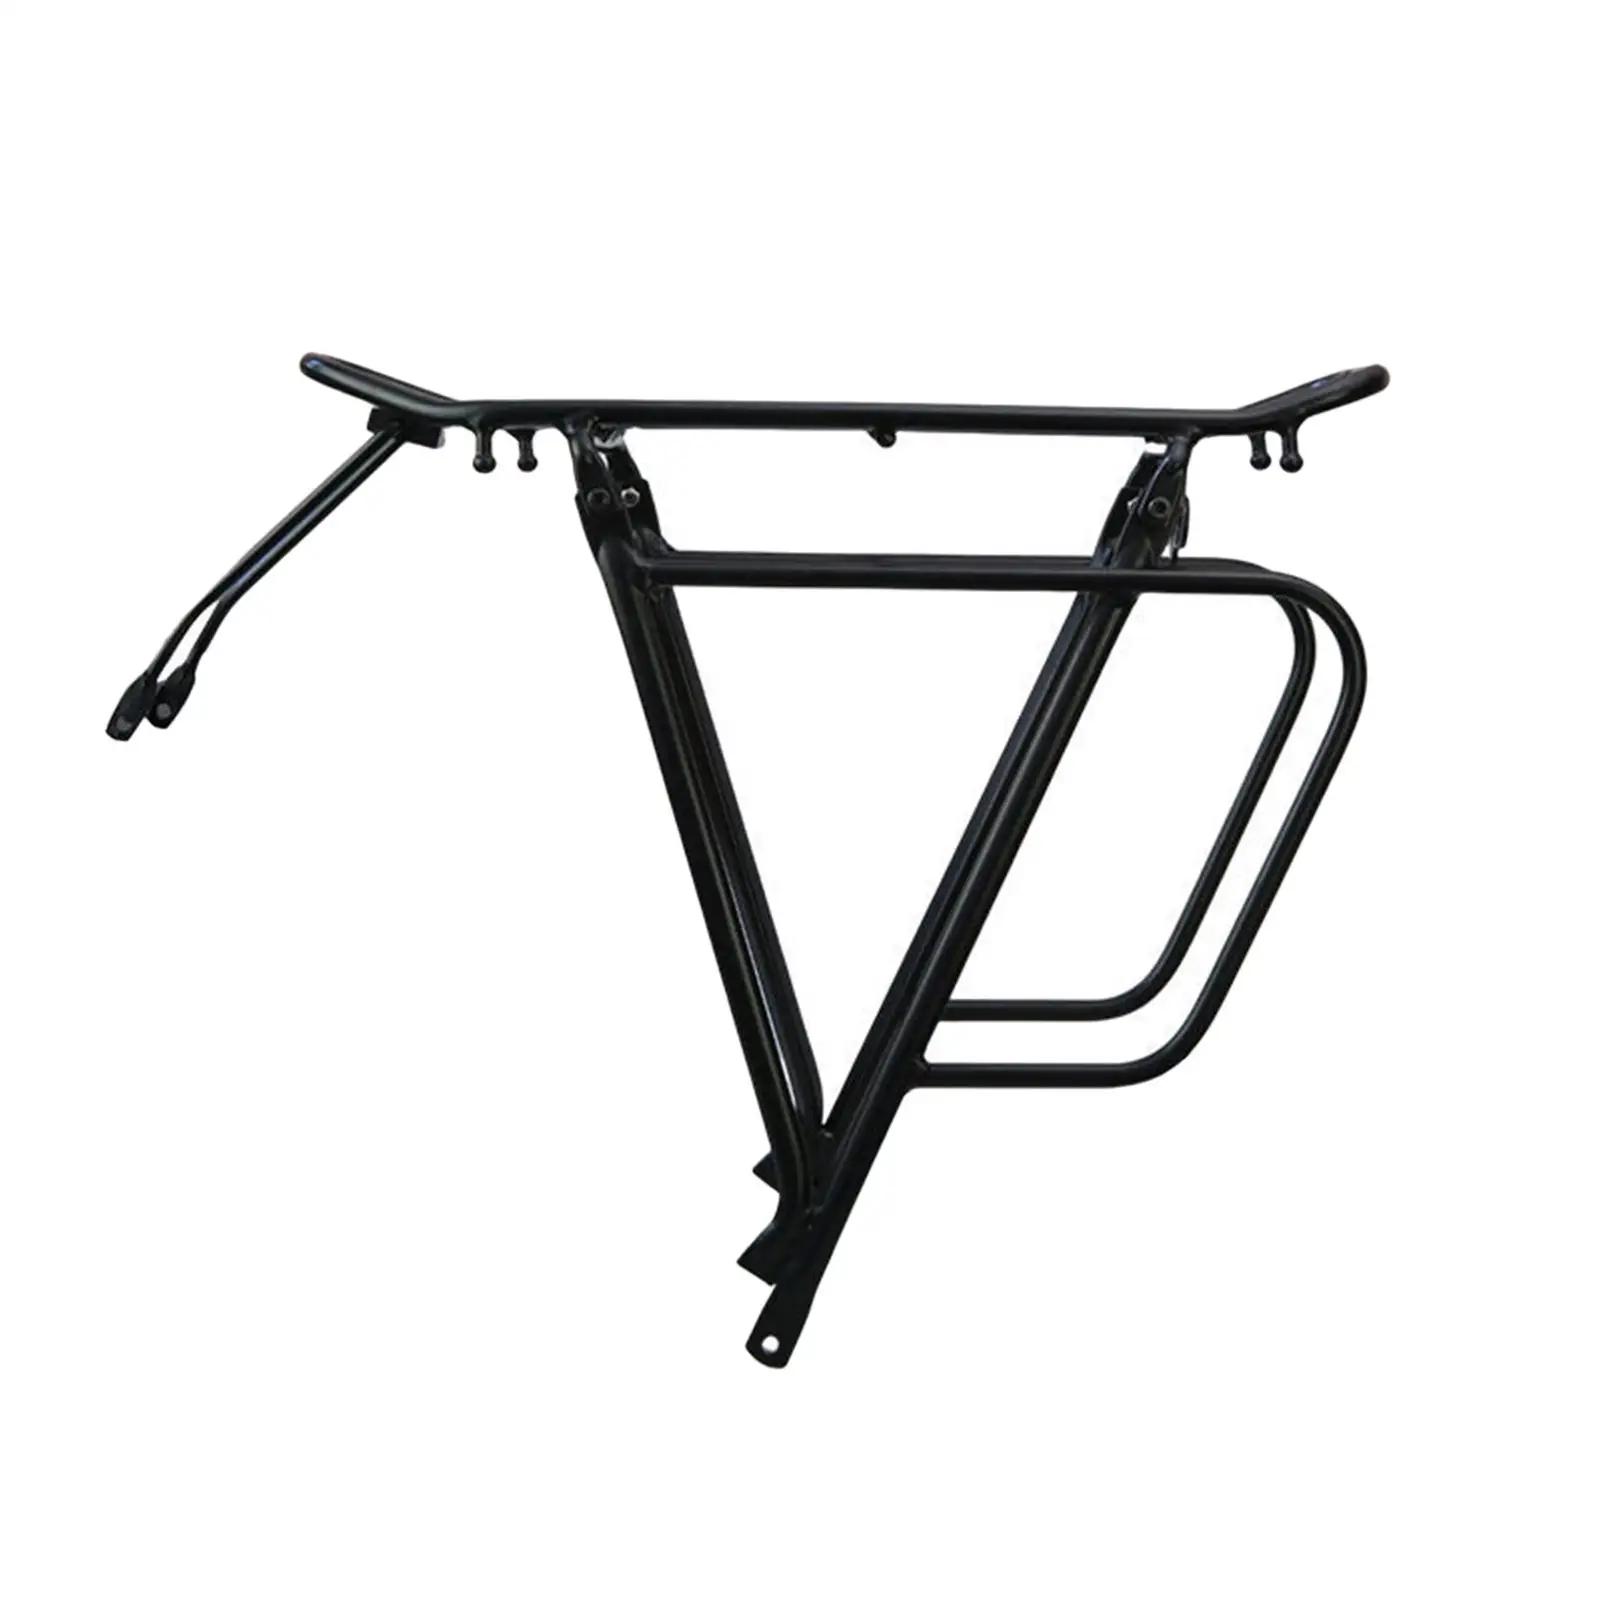 Bicycle Rear Luggage Cargo Rack Portable Bicycling Bicycle Carrier Rack